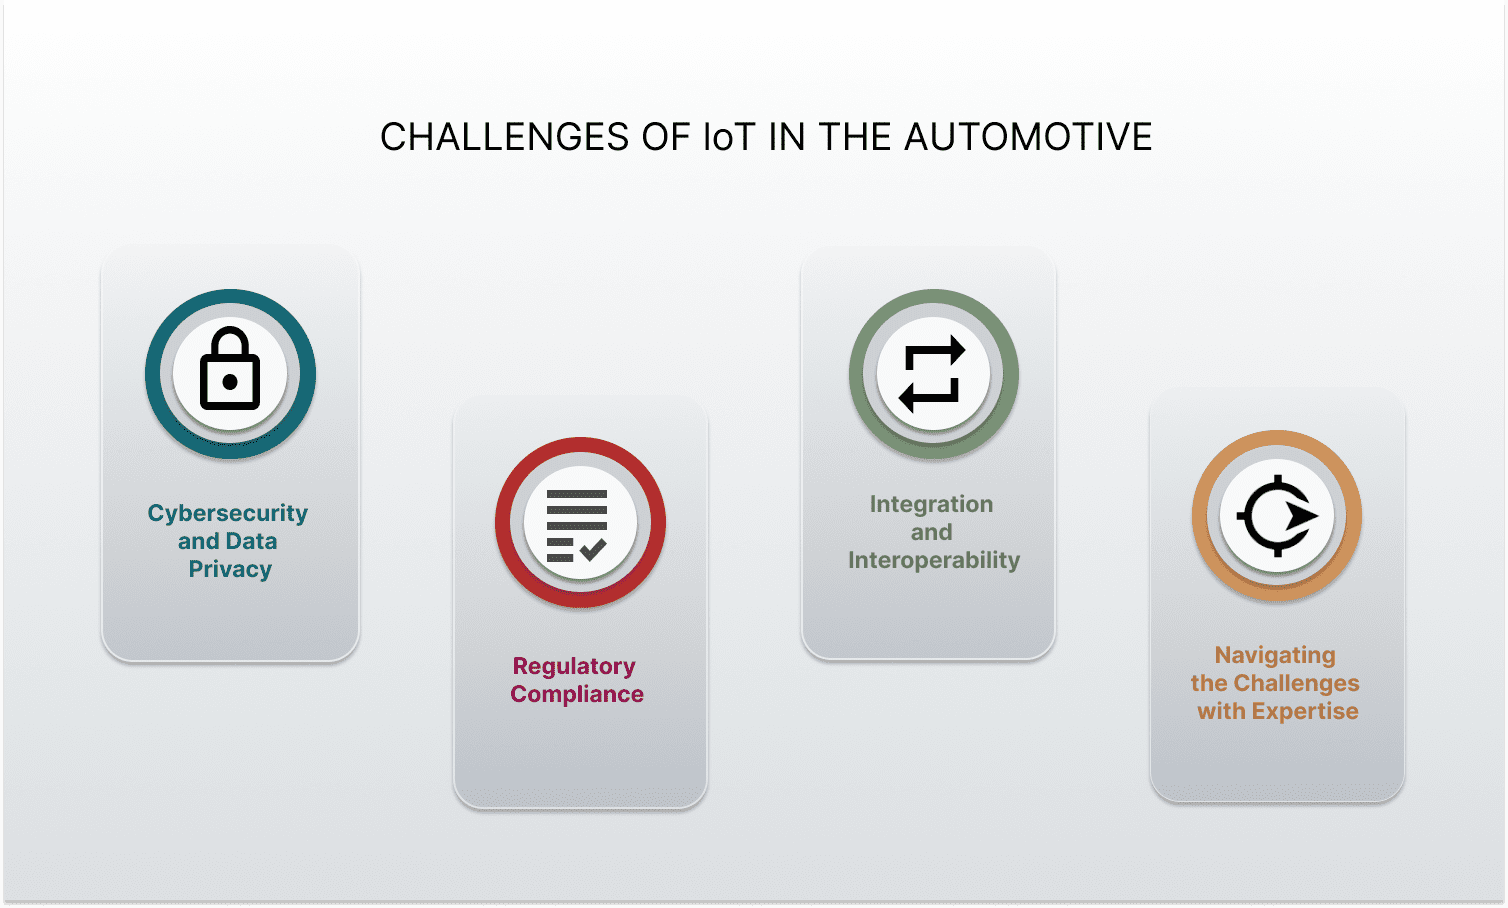 Addressing the Challenges of IoT in the Automotive Sector